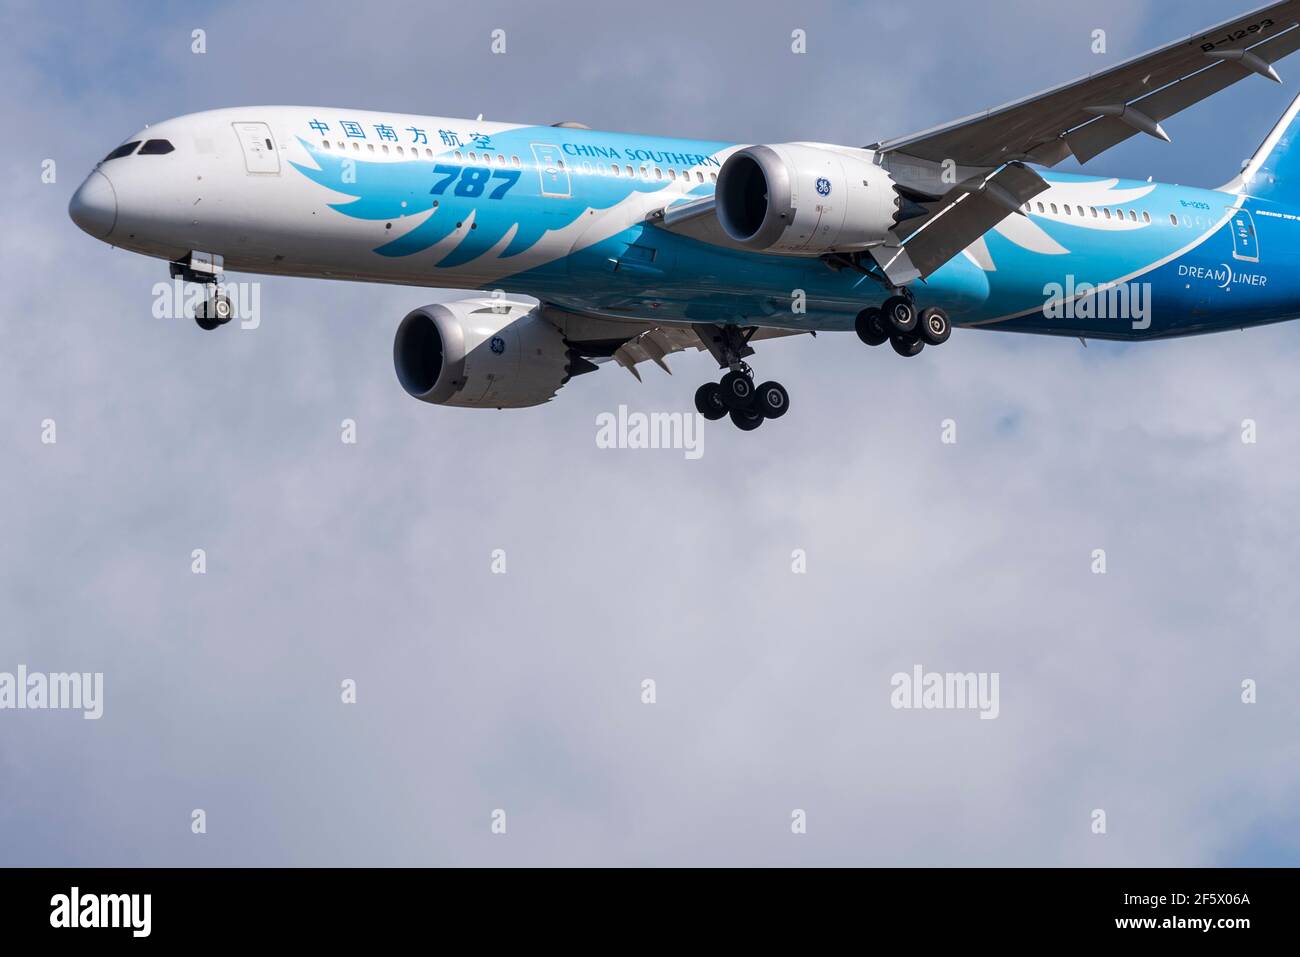 China Southern Airlines Boeing 787 Dreamliner jet airliner plane B-1293 on finals to land at London Heathrow Airport, UK. Chinese airline. Bright Stock Photo